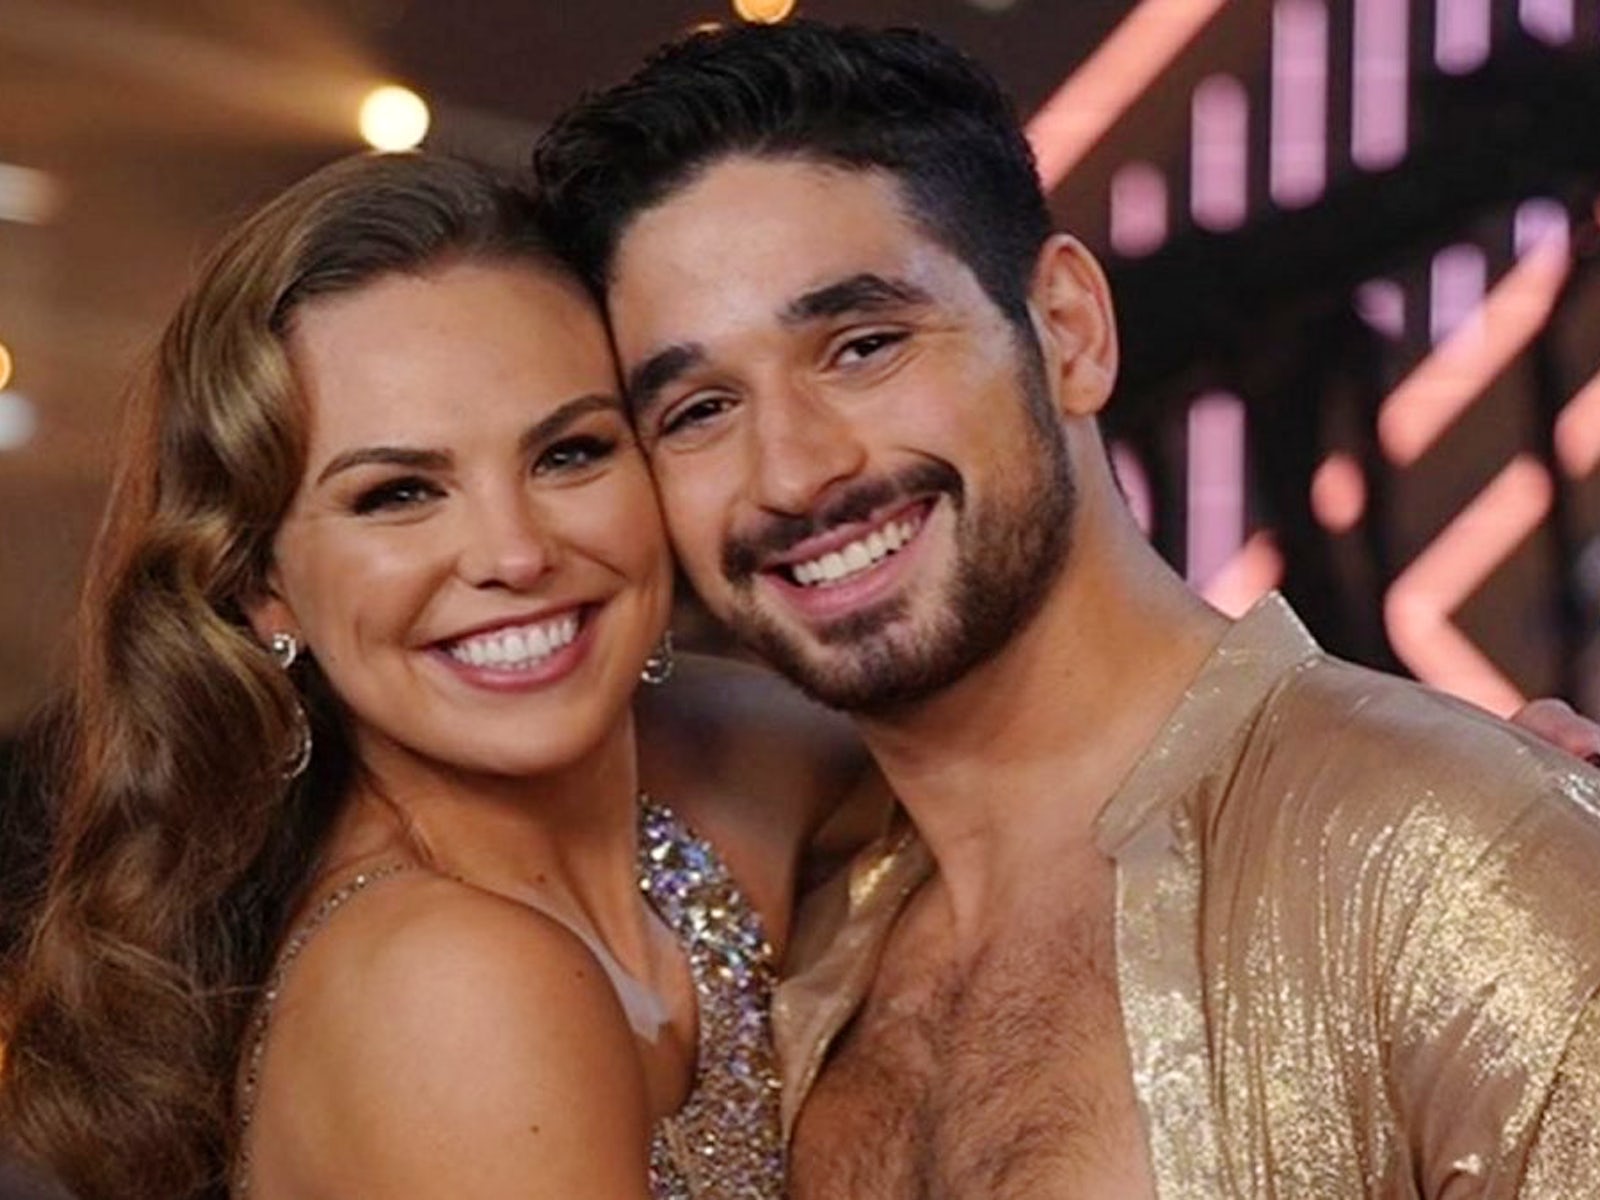 'Dancing with the Stars' couple Hannah Brown and Alan Bersten We call